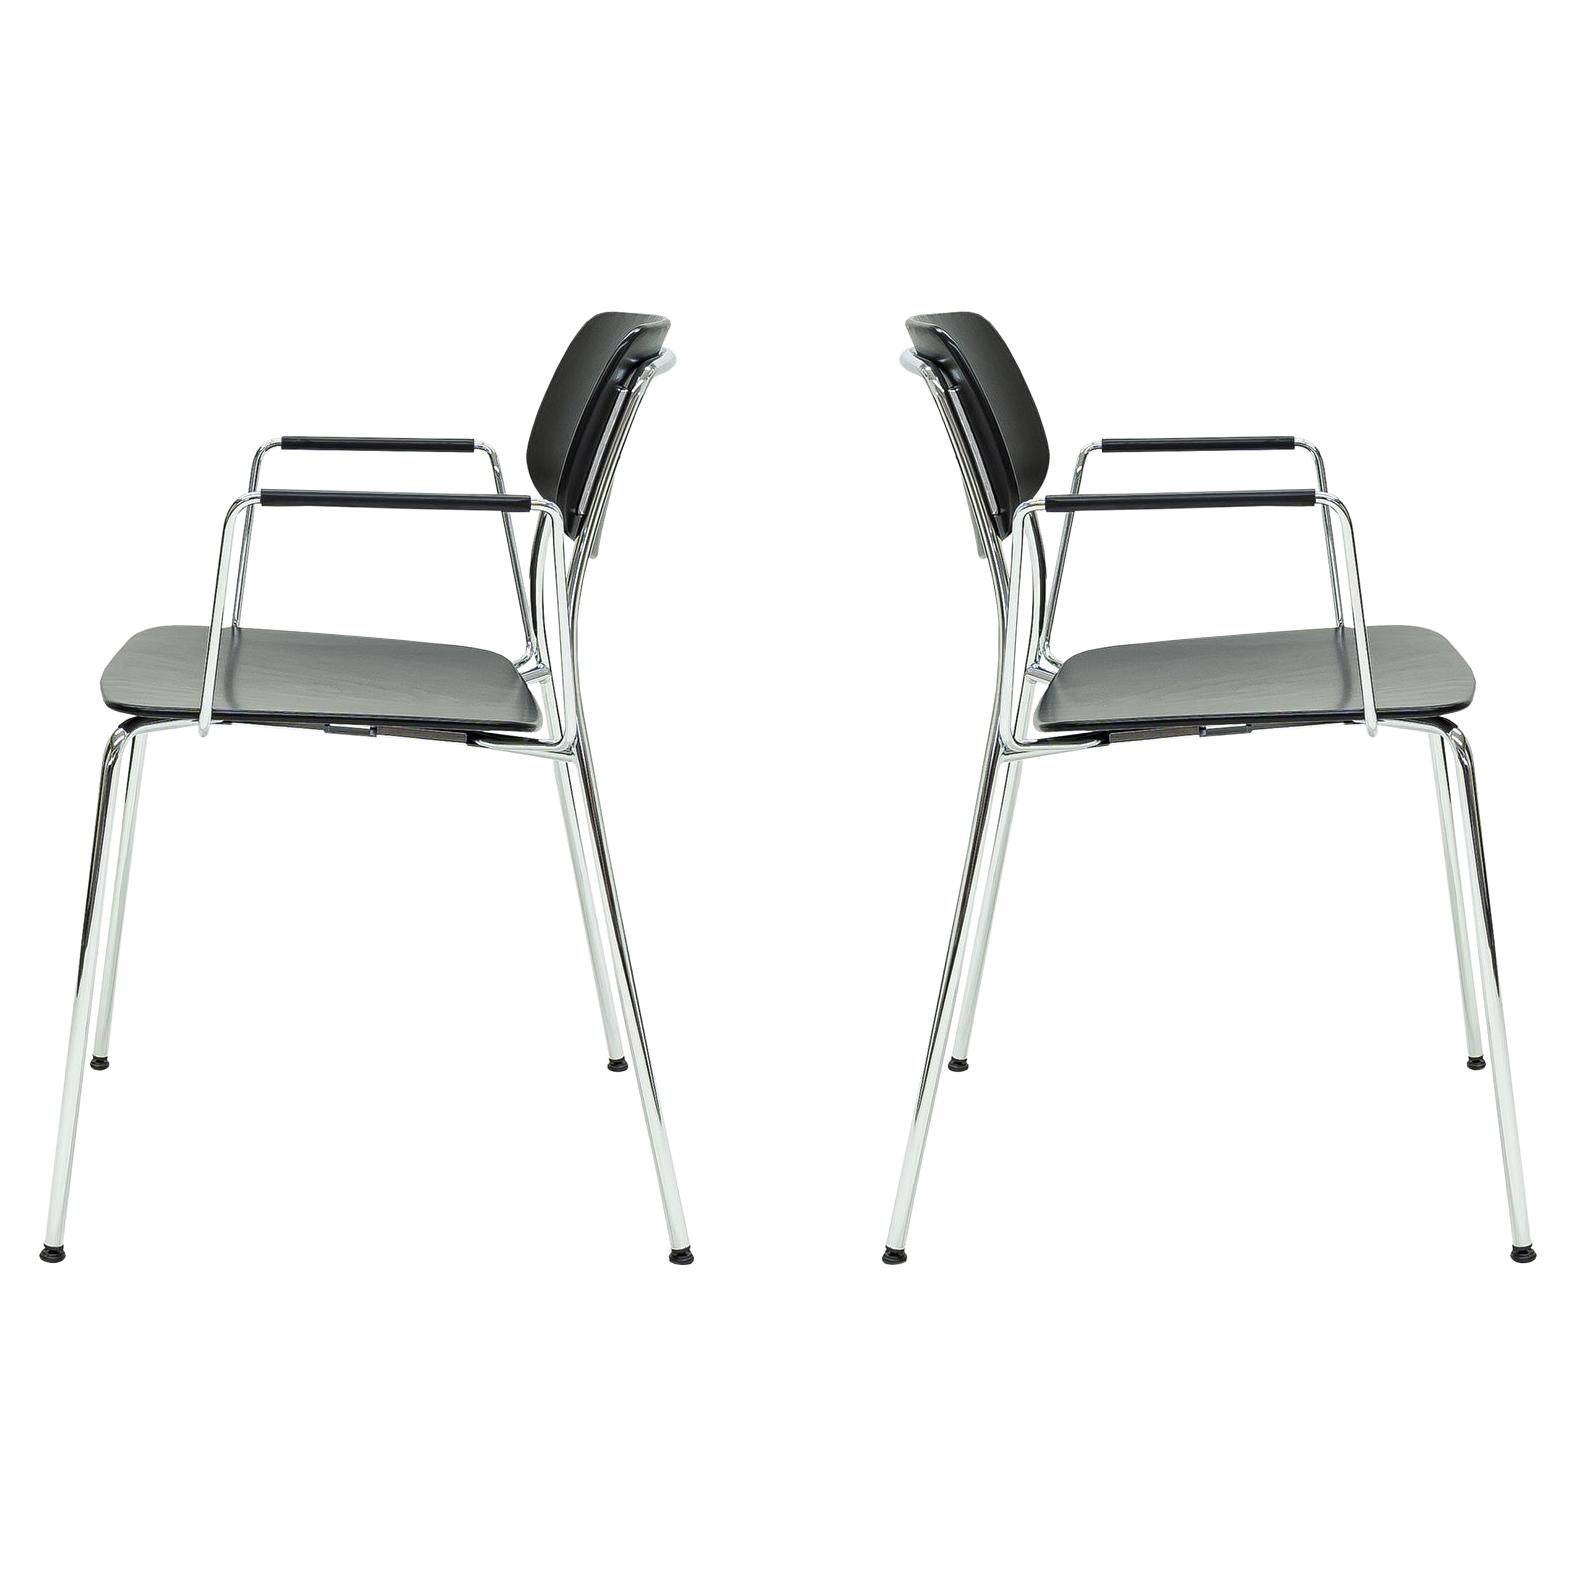 Dietiker Felber C14 Metal Dining Chair with Arms, Modular Design, Set of 2